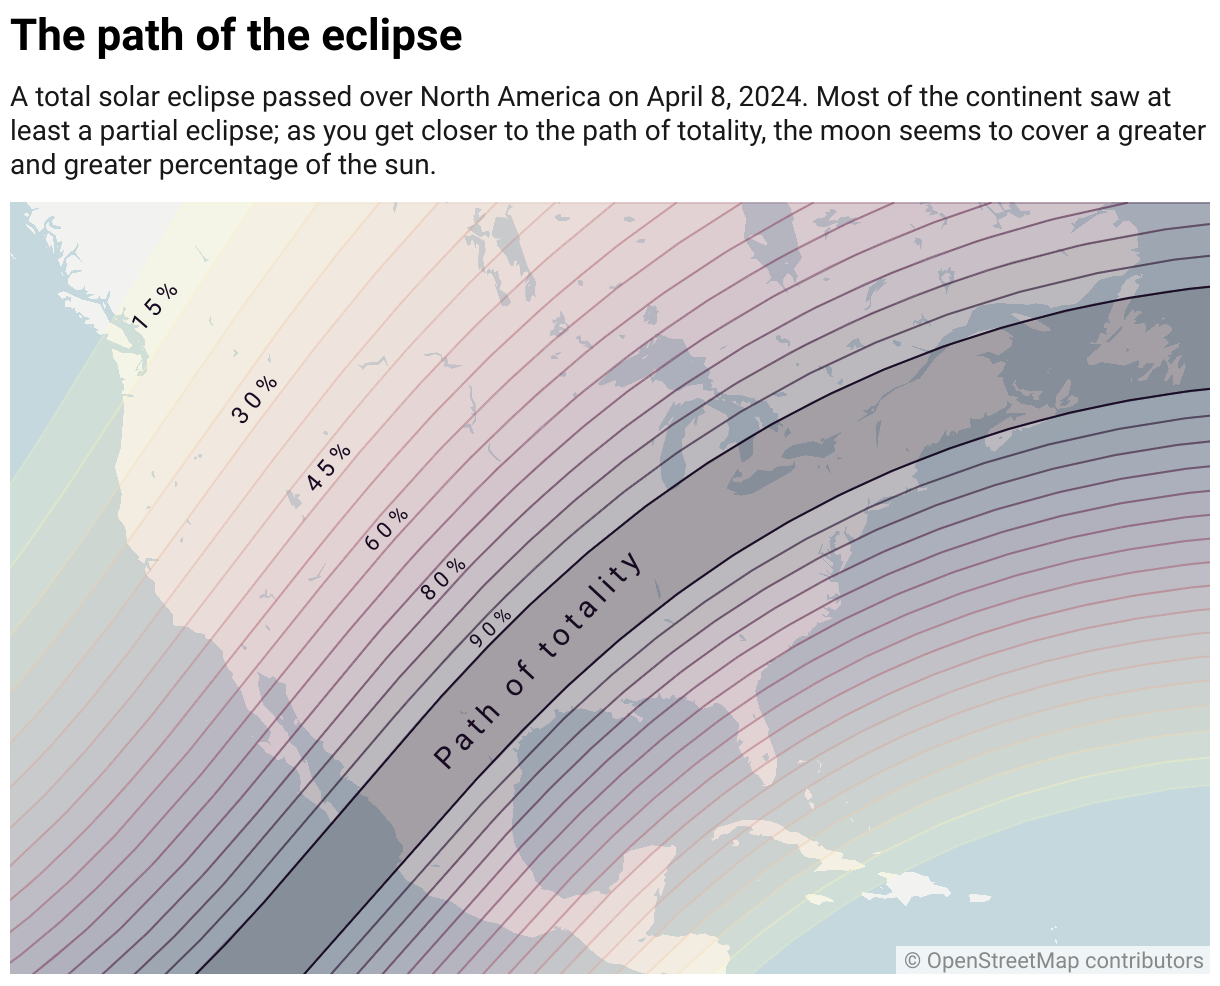 The path of the eclipse